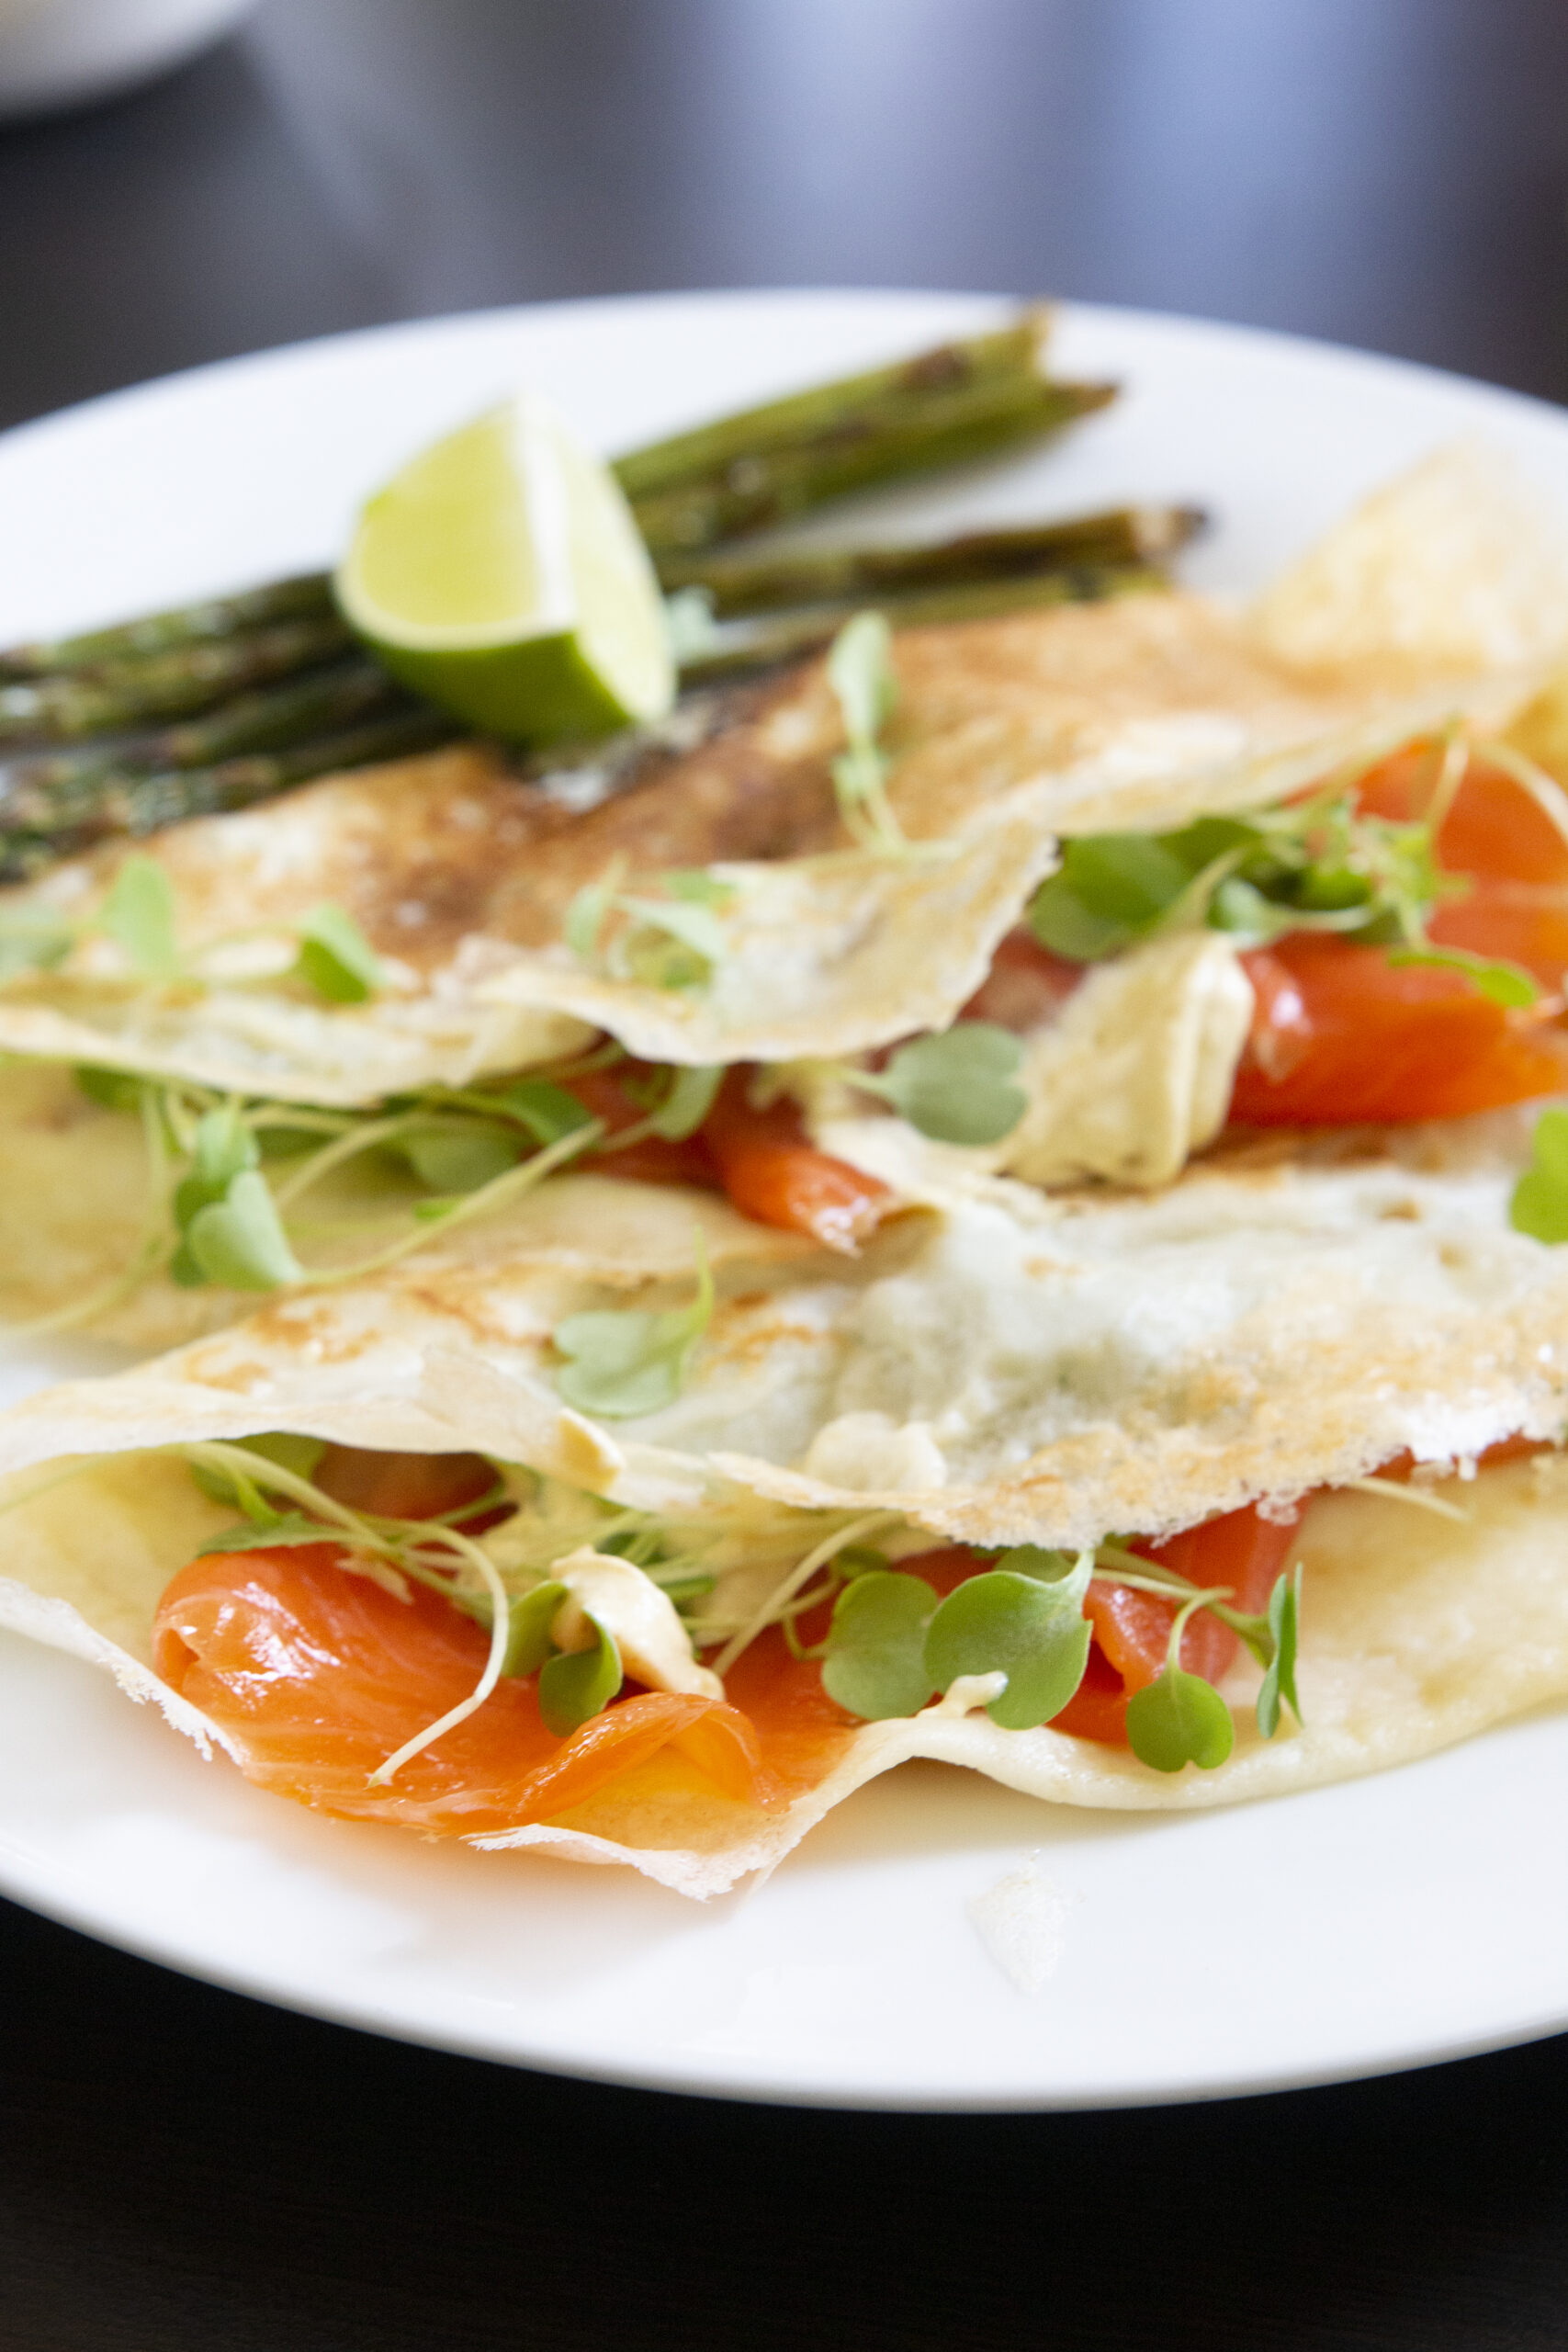 Smoked Salmon Crepes with Creamy Mustard Sauce pic